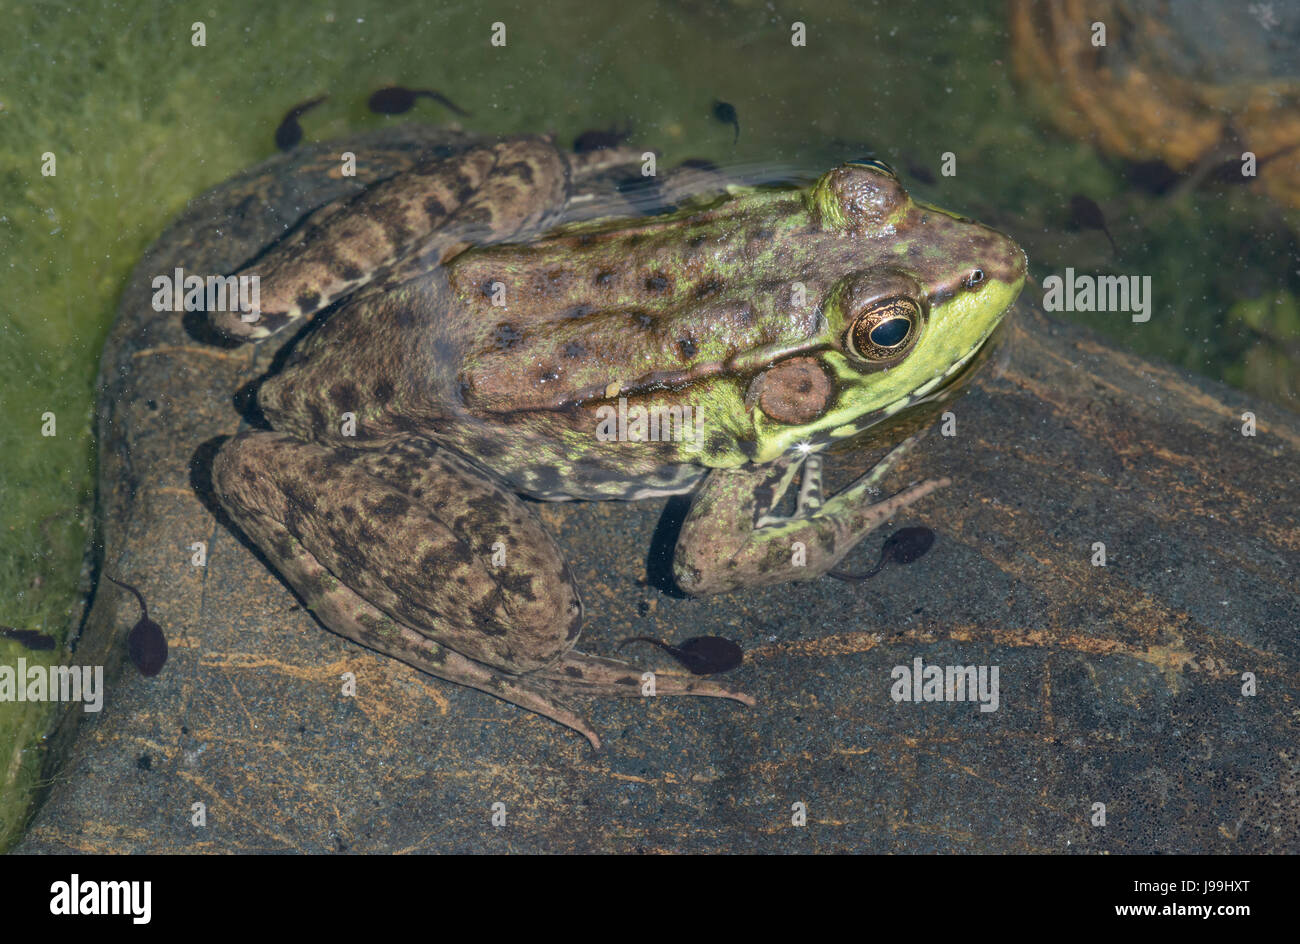 Green Frog (Lithobates clamitans) resting on rock in pond, E USA Stock Photo